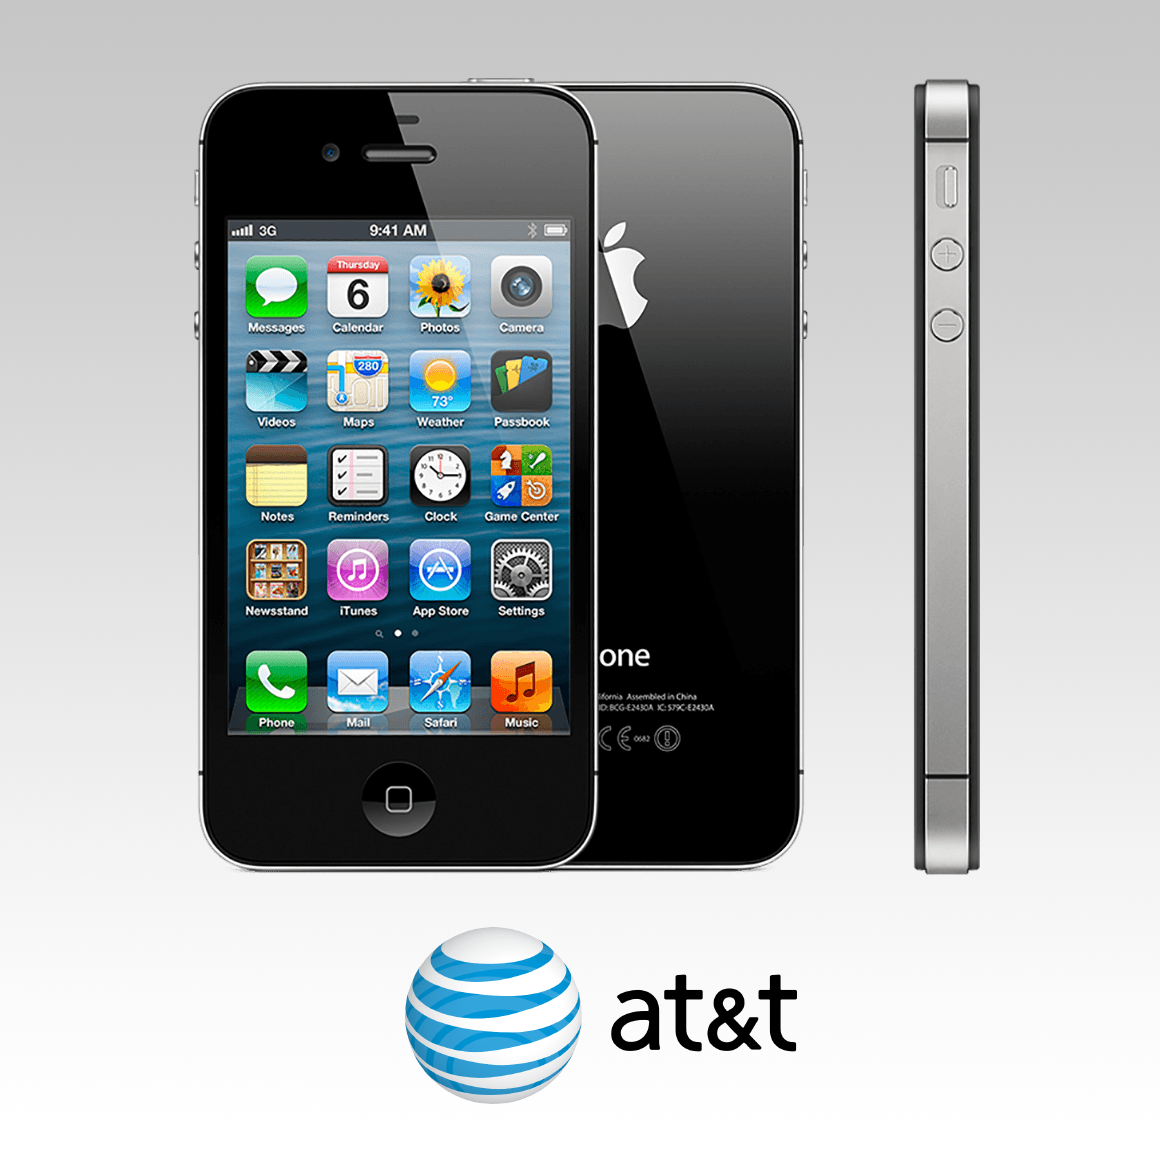 apple iphone 4s at t model gsm apple iphone 5s at